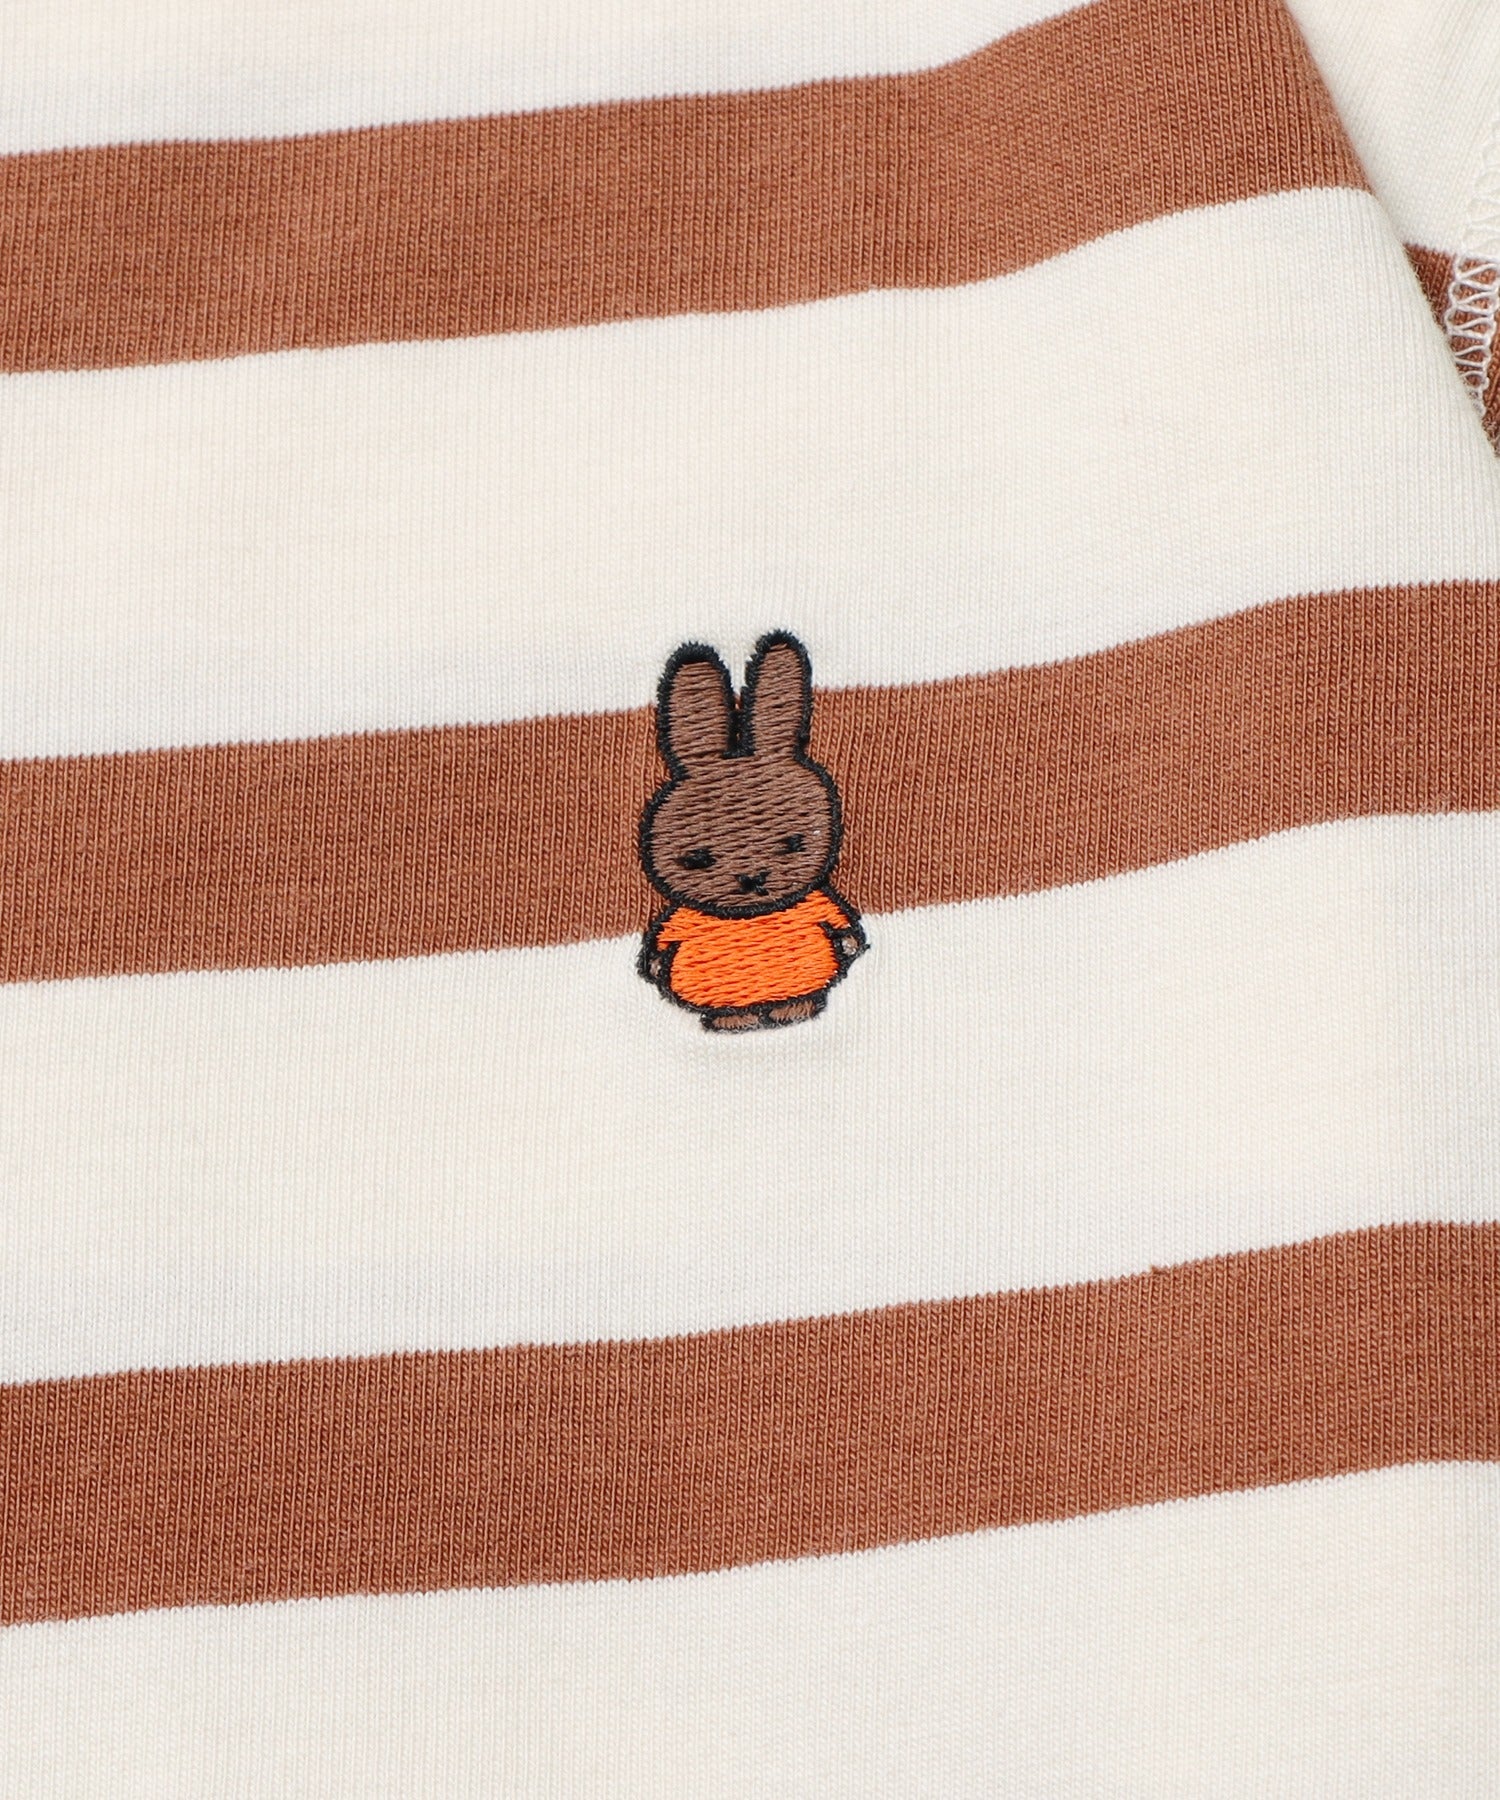 POP TRADING COMPANY/ポップトレーディングカンパニー miffy embroidered striped longsleeve t-shirt